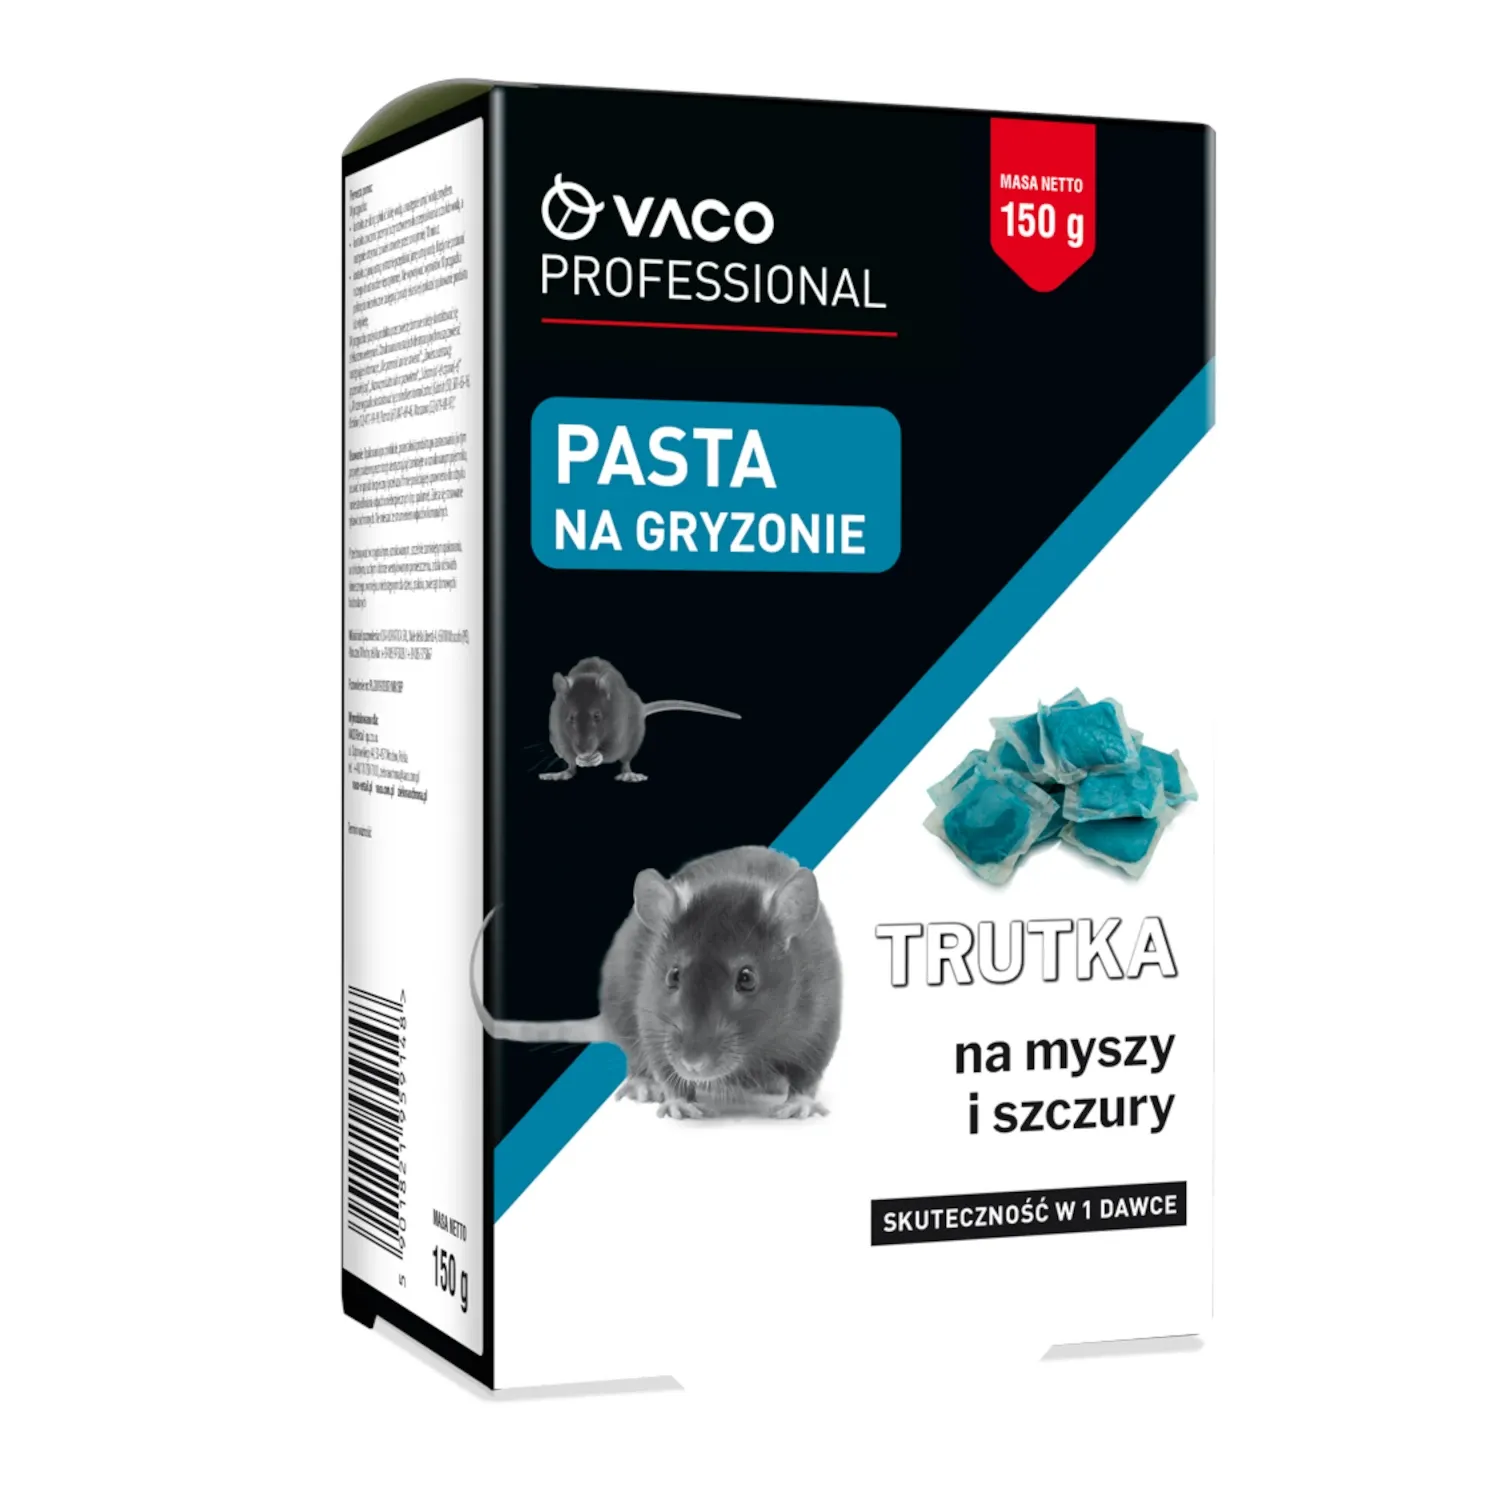 VACO PROFESSIONAL PASTE FOR MICE AND RATS (BOX) 150G